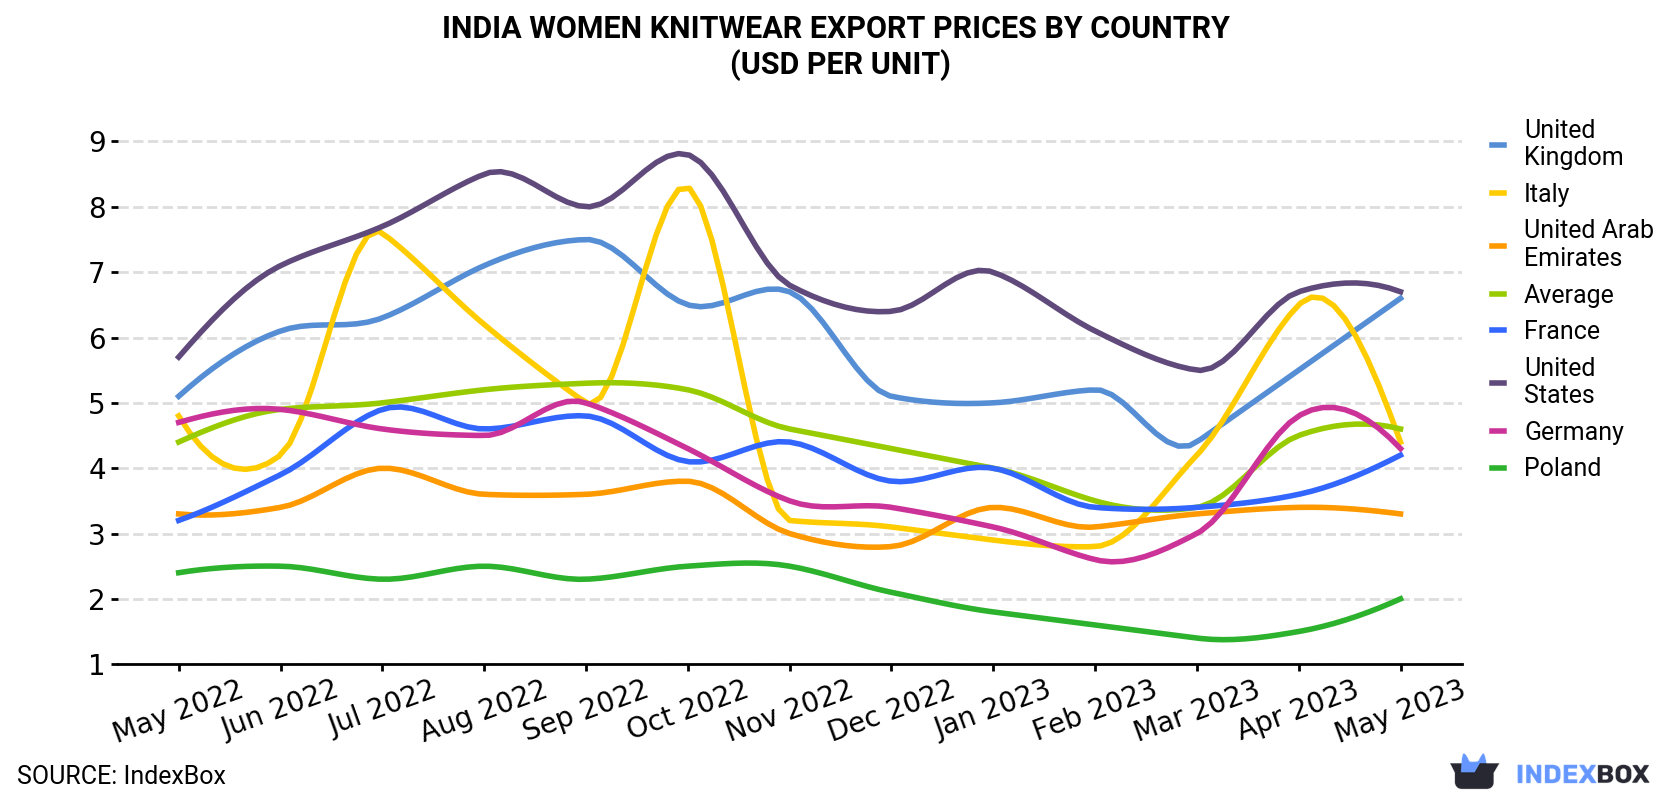 India Women Knitwear Export Prices By Country (USD Per Unit)